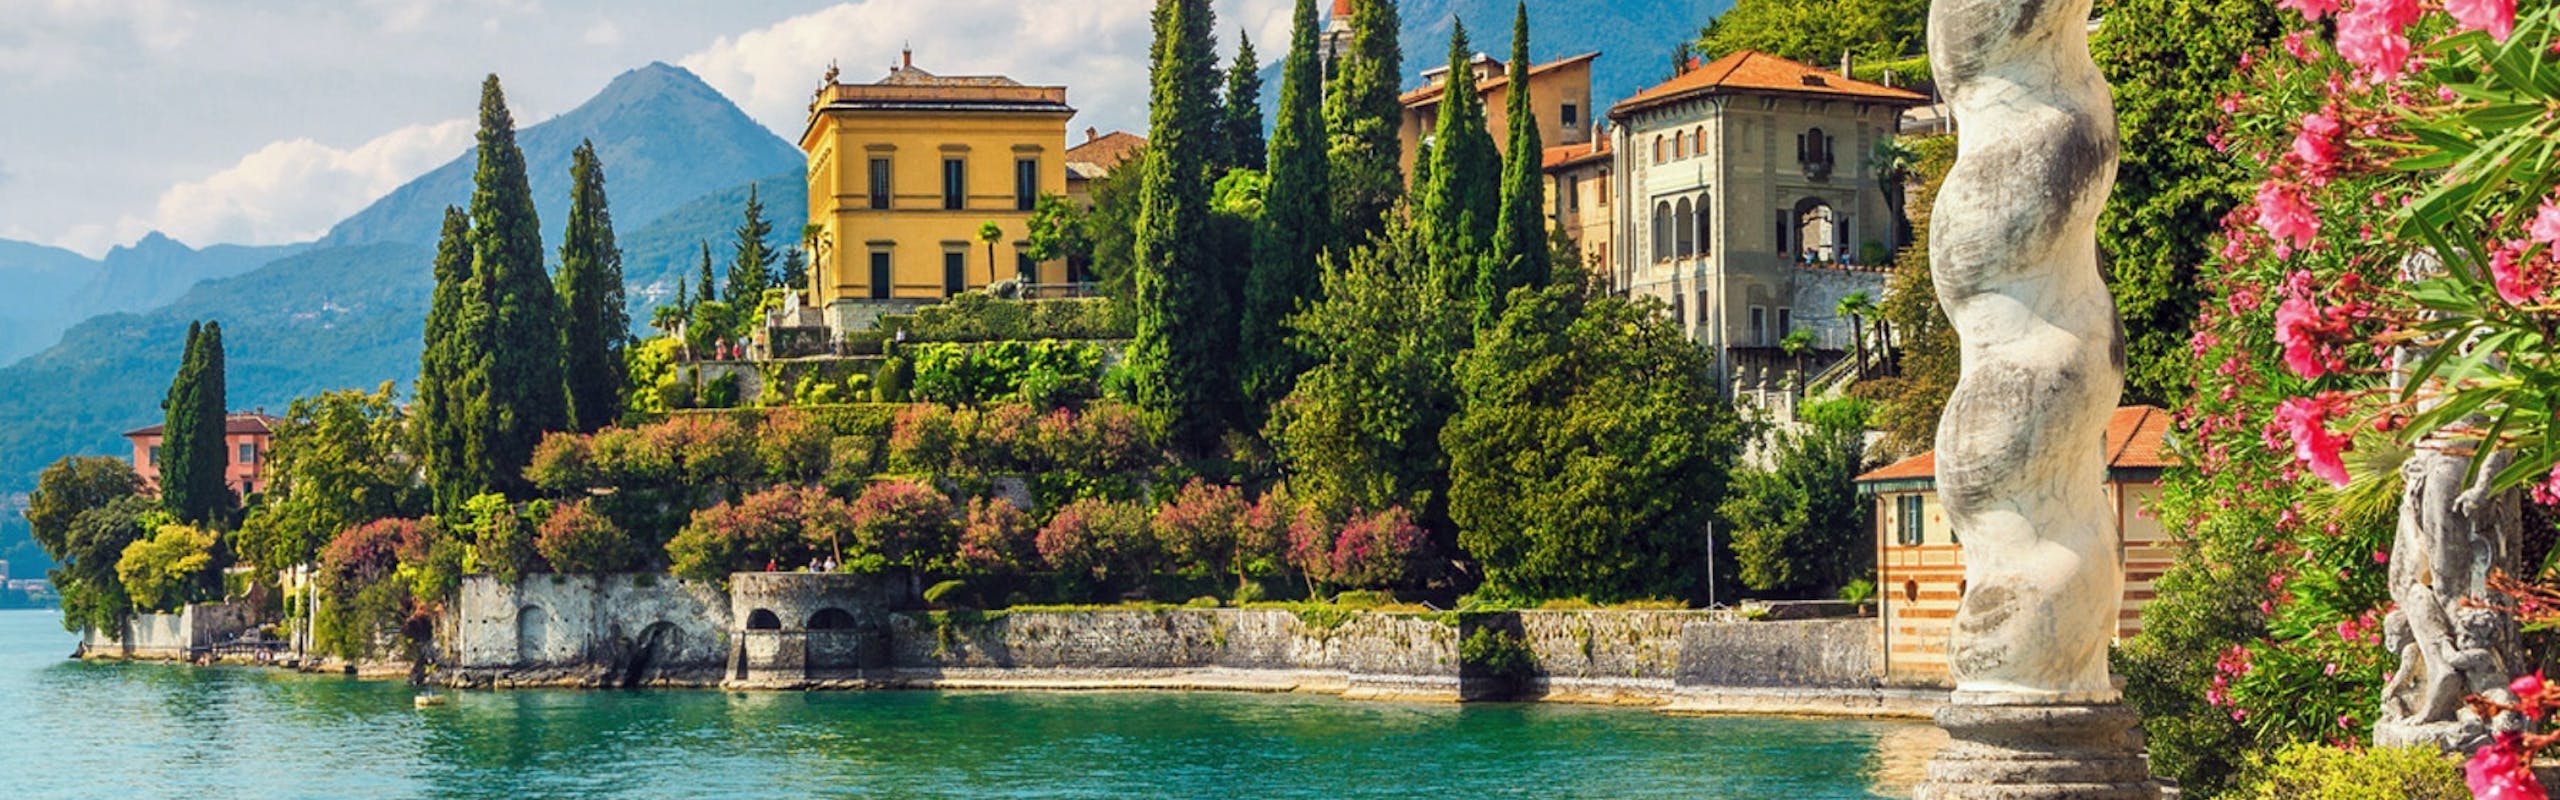 Lake Como Italy with italian houses, the blue lake, and mountains in the background. pink flowers in a bush on the side and a dock in the water with a staircase leading down beside it